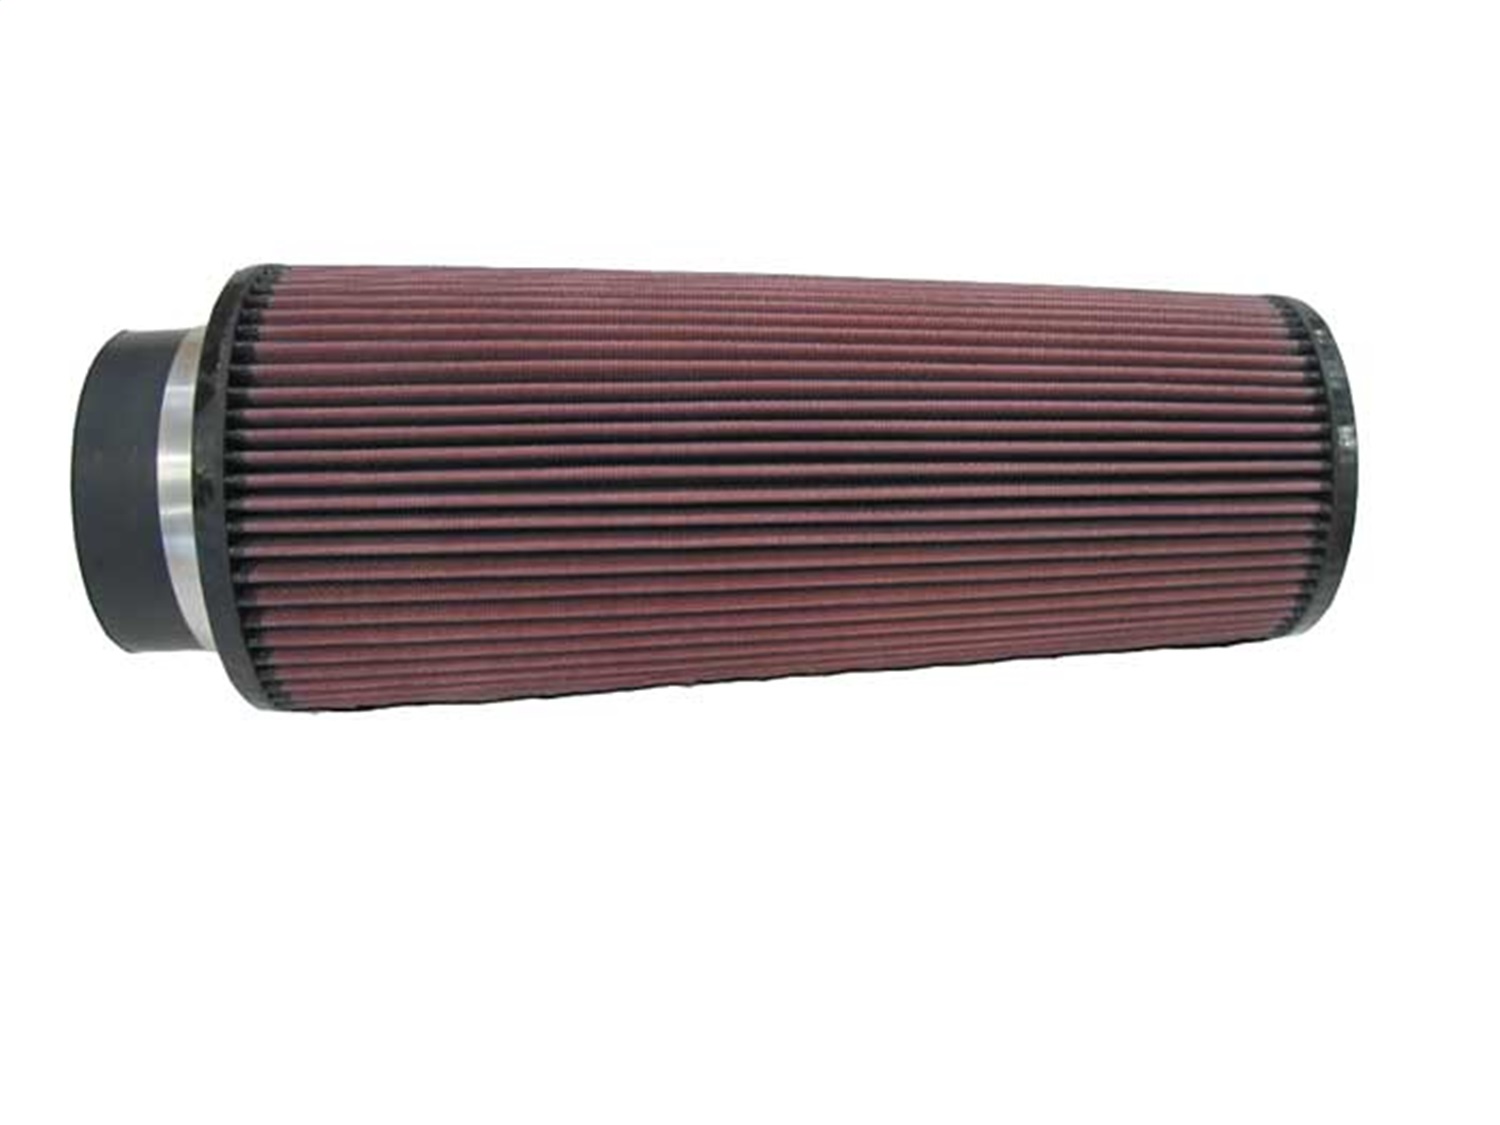 K&N Filters K&N Filters RE-0880 Universal Air Cleaner Assembly